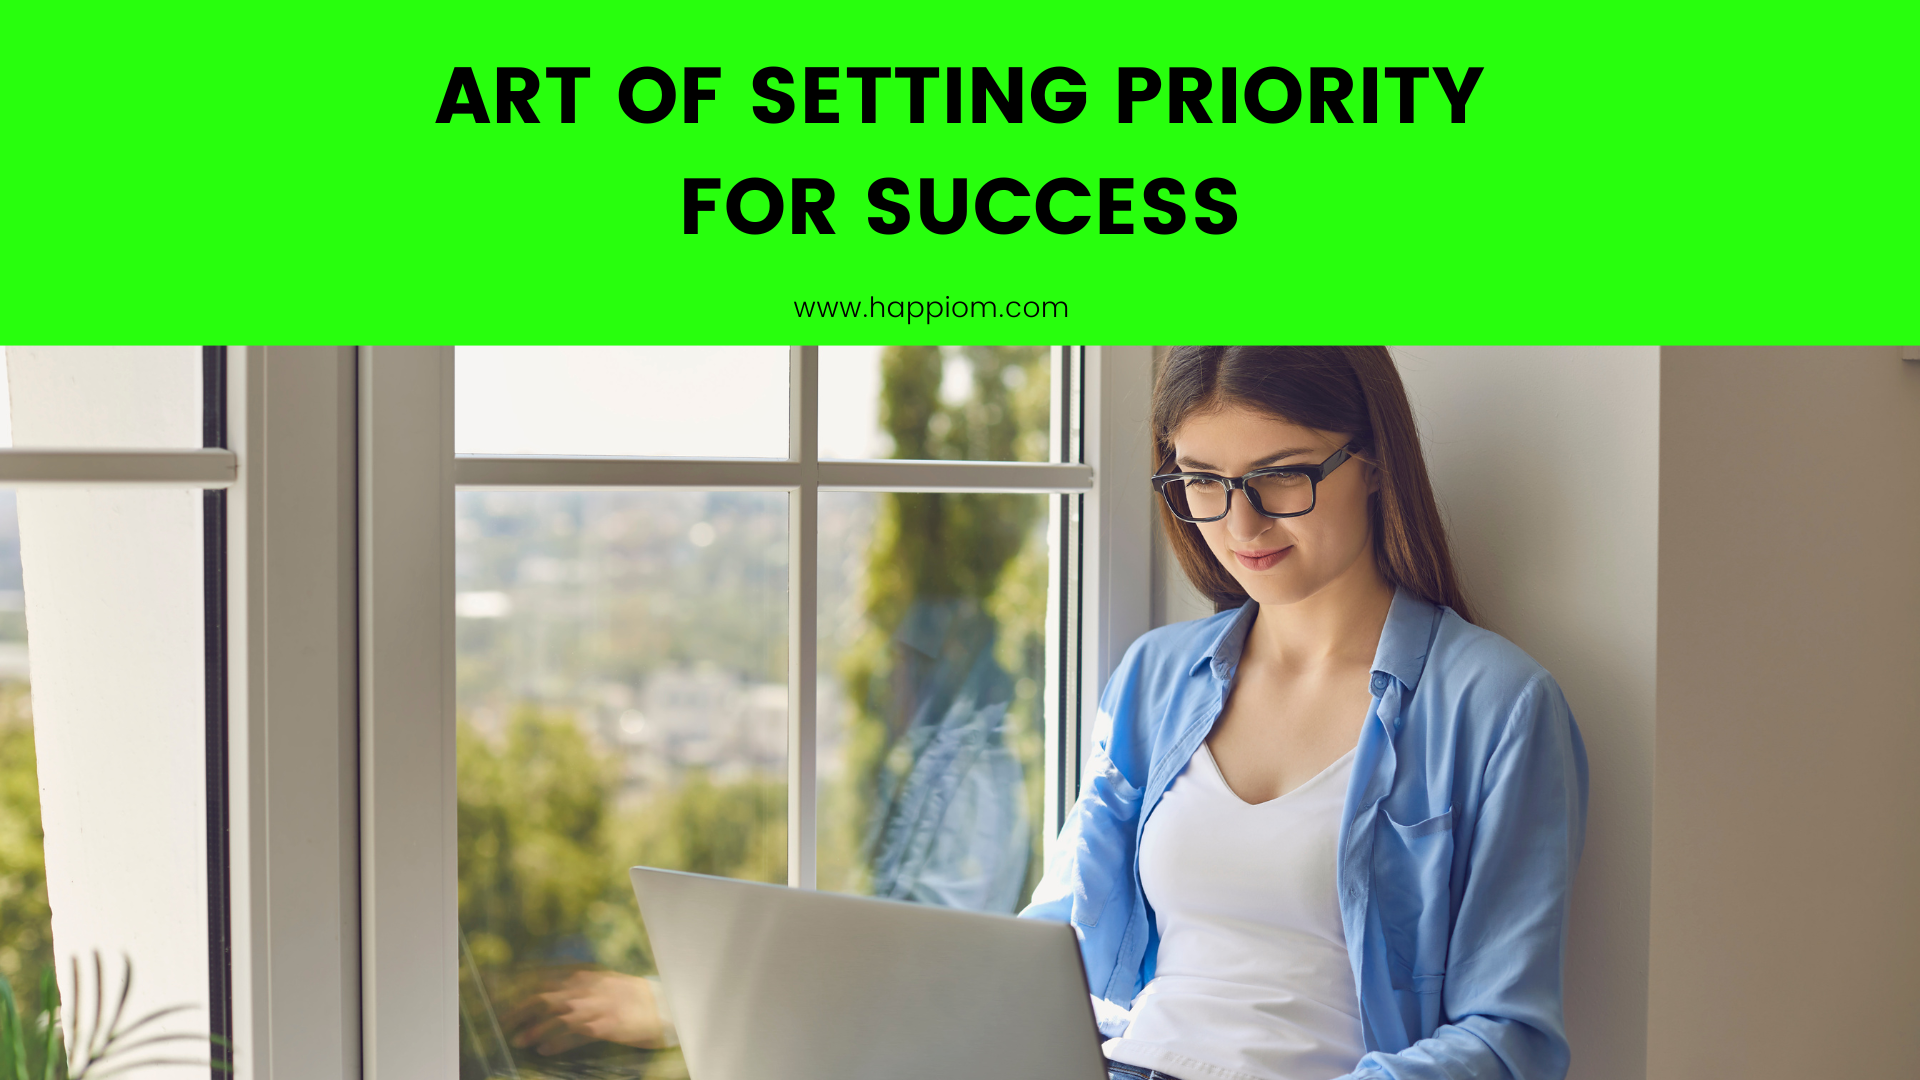 image showing a person working towards setting priority in life - working on a new skill with laptop